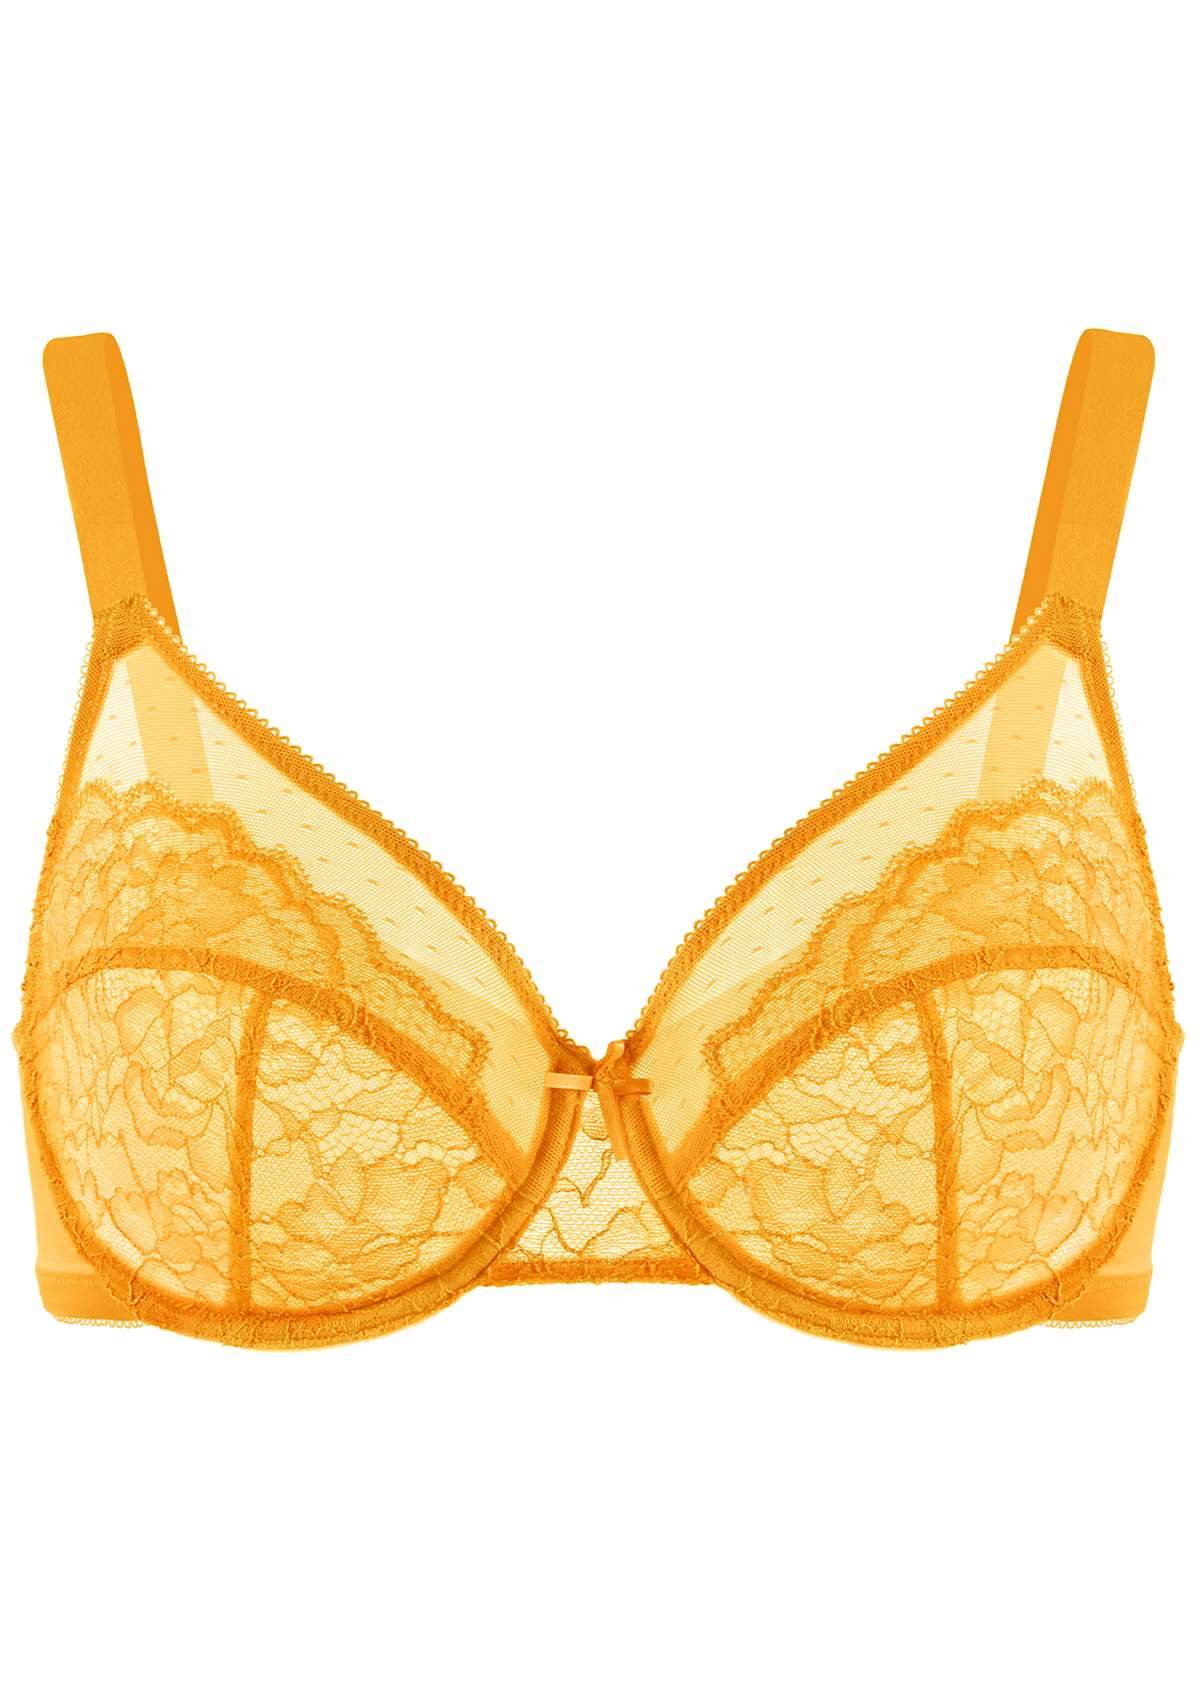 HSIA Enchante Bra And Panty Sets: Unpadded Bra With Back Support - Cadmium Yellow / 40 / C